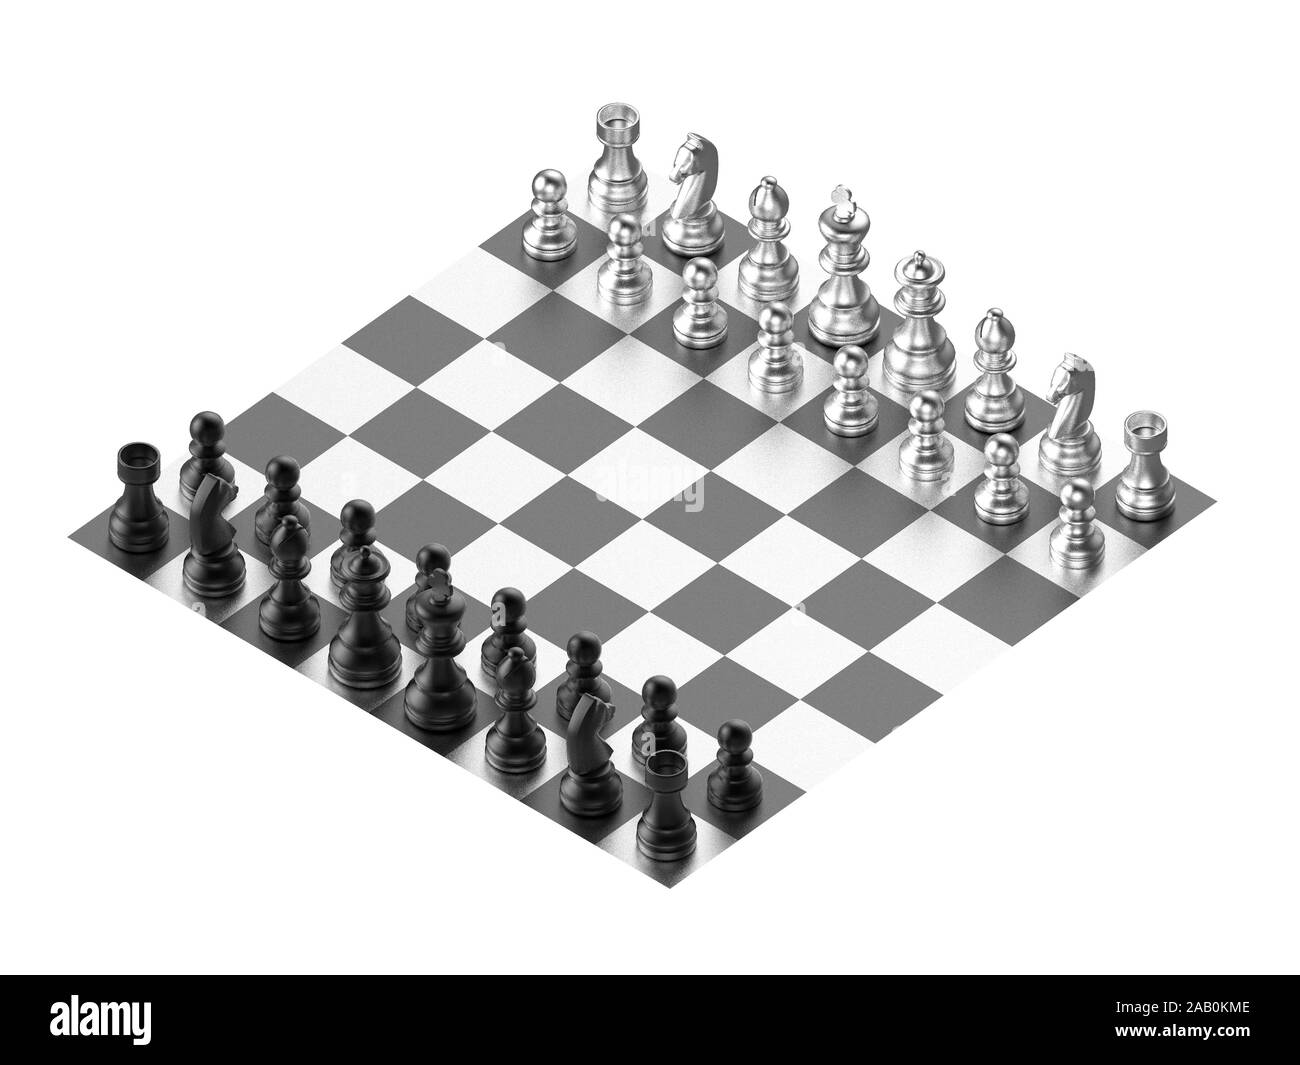 Download Black and White Chess Battle on the Board Wallpaper